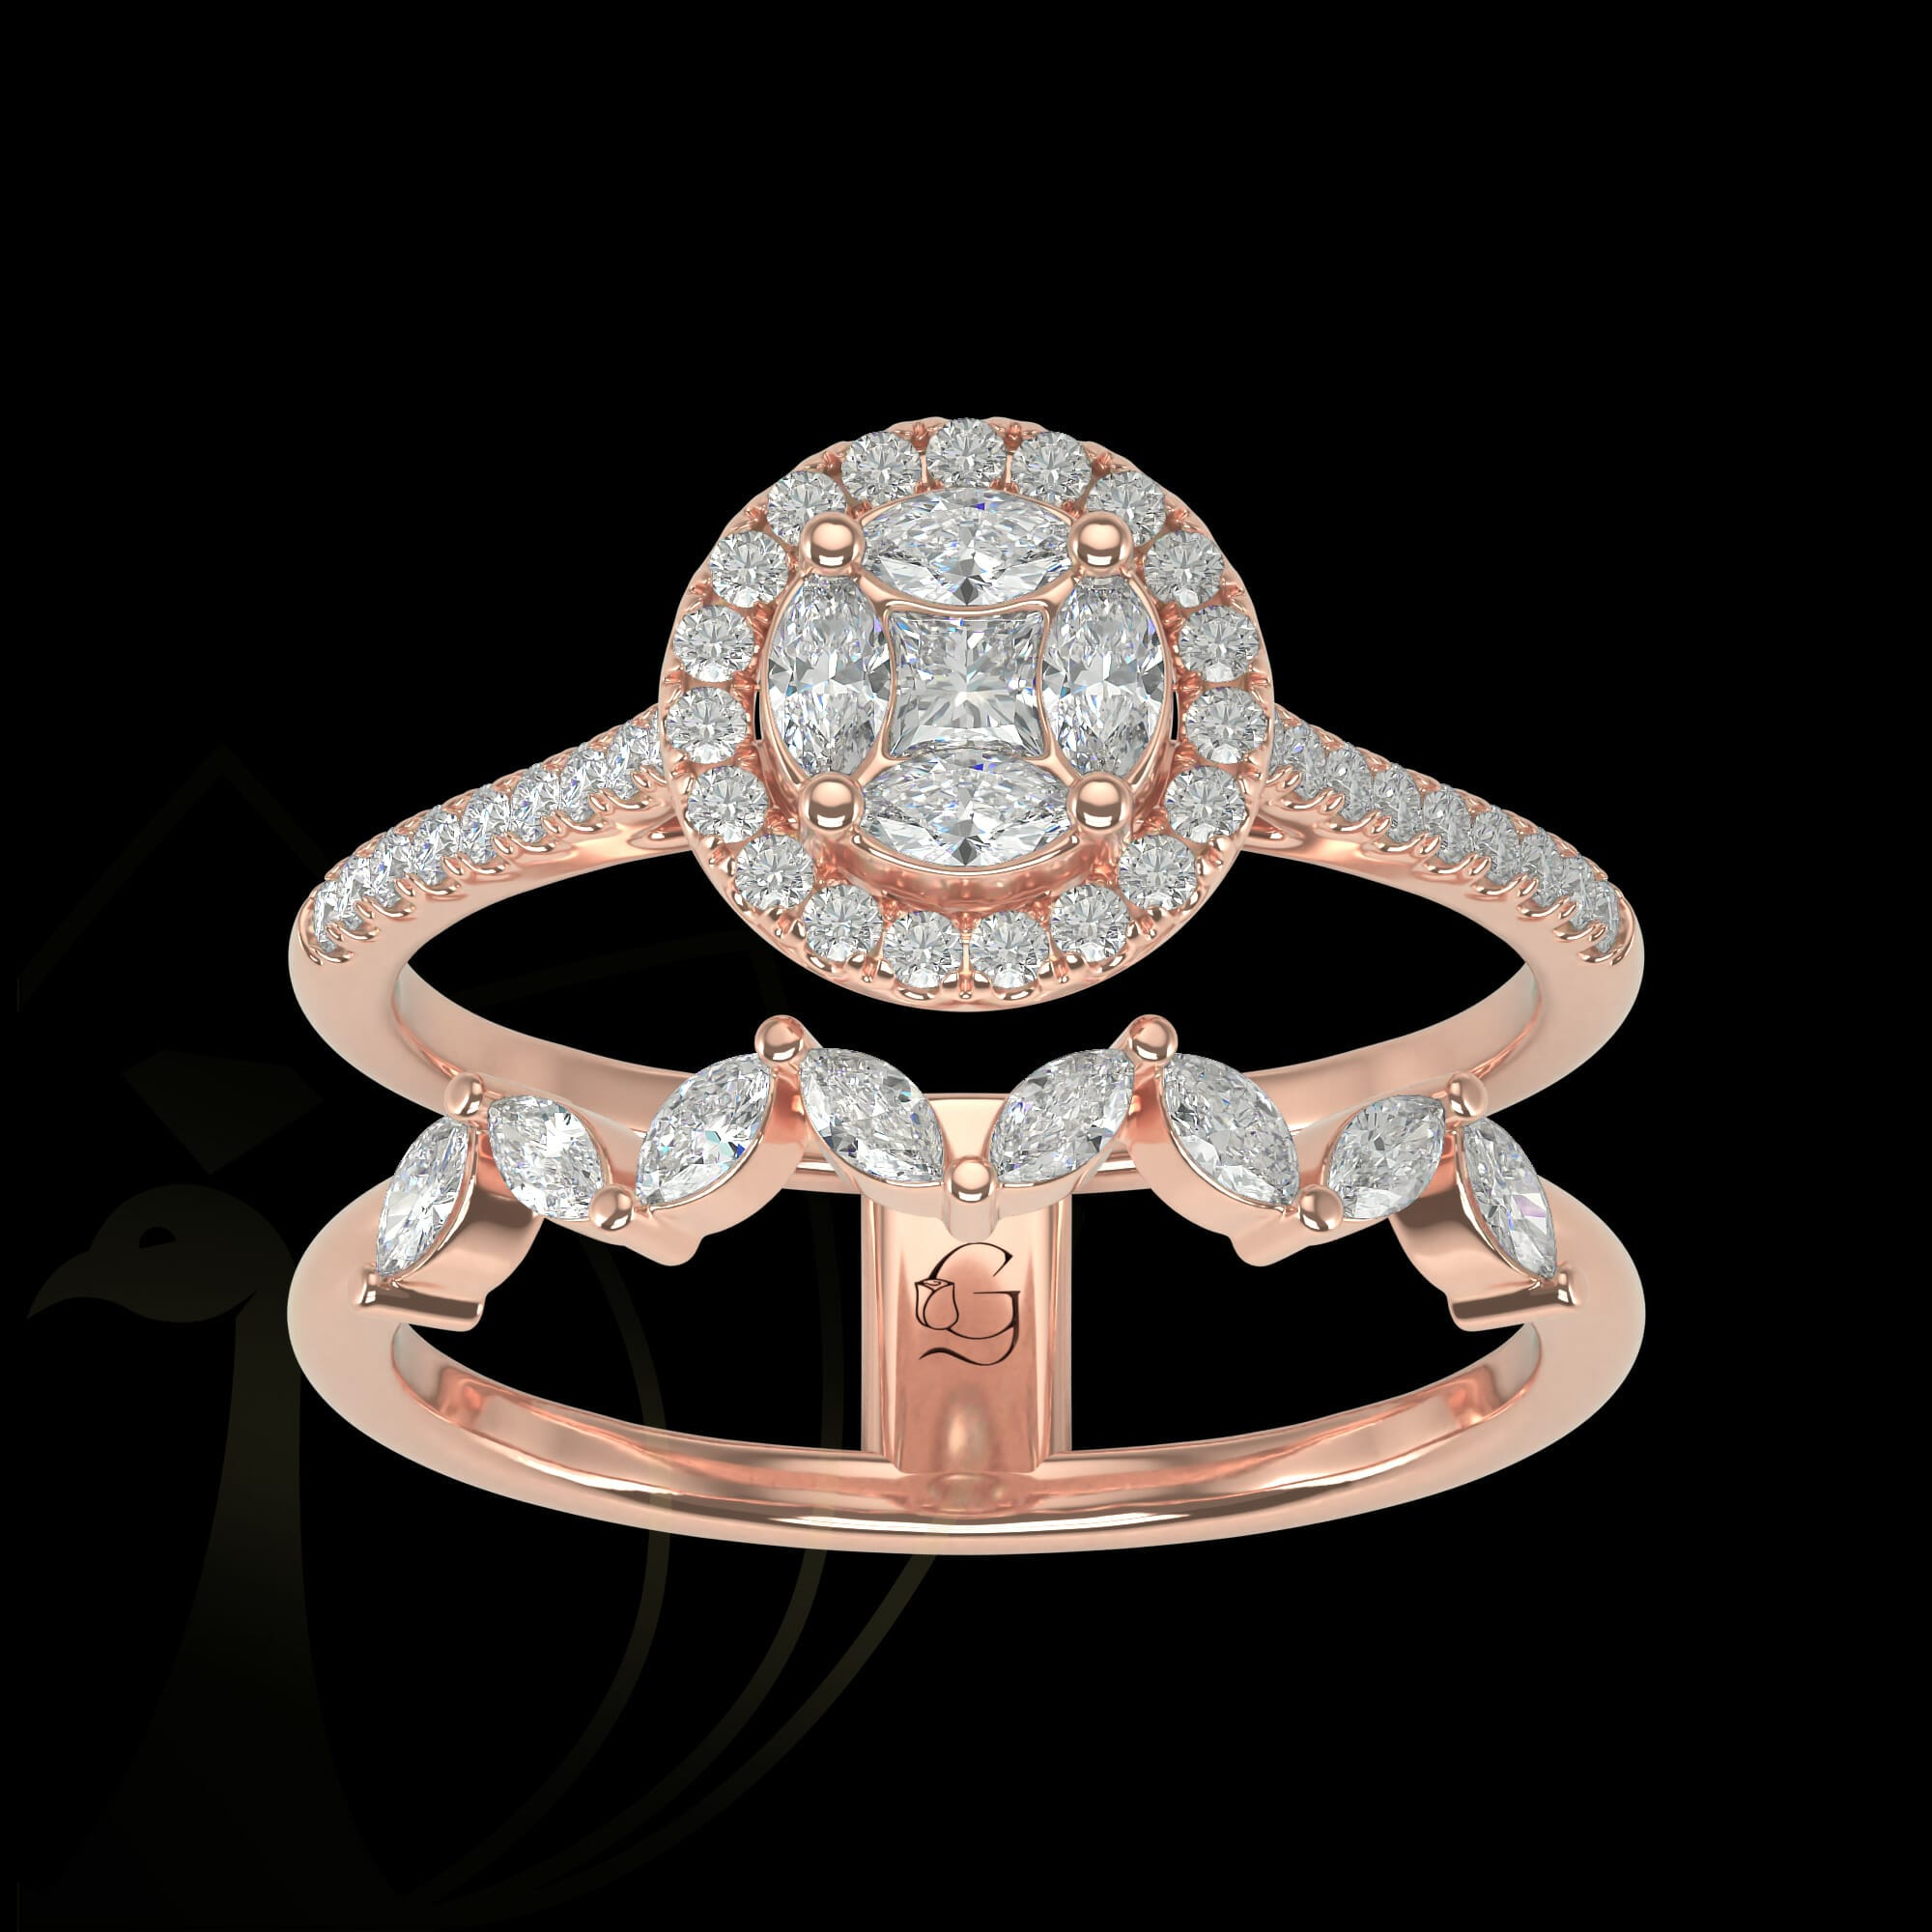 The twinning beauty diamond ring in rose gold.